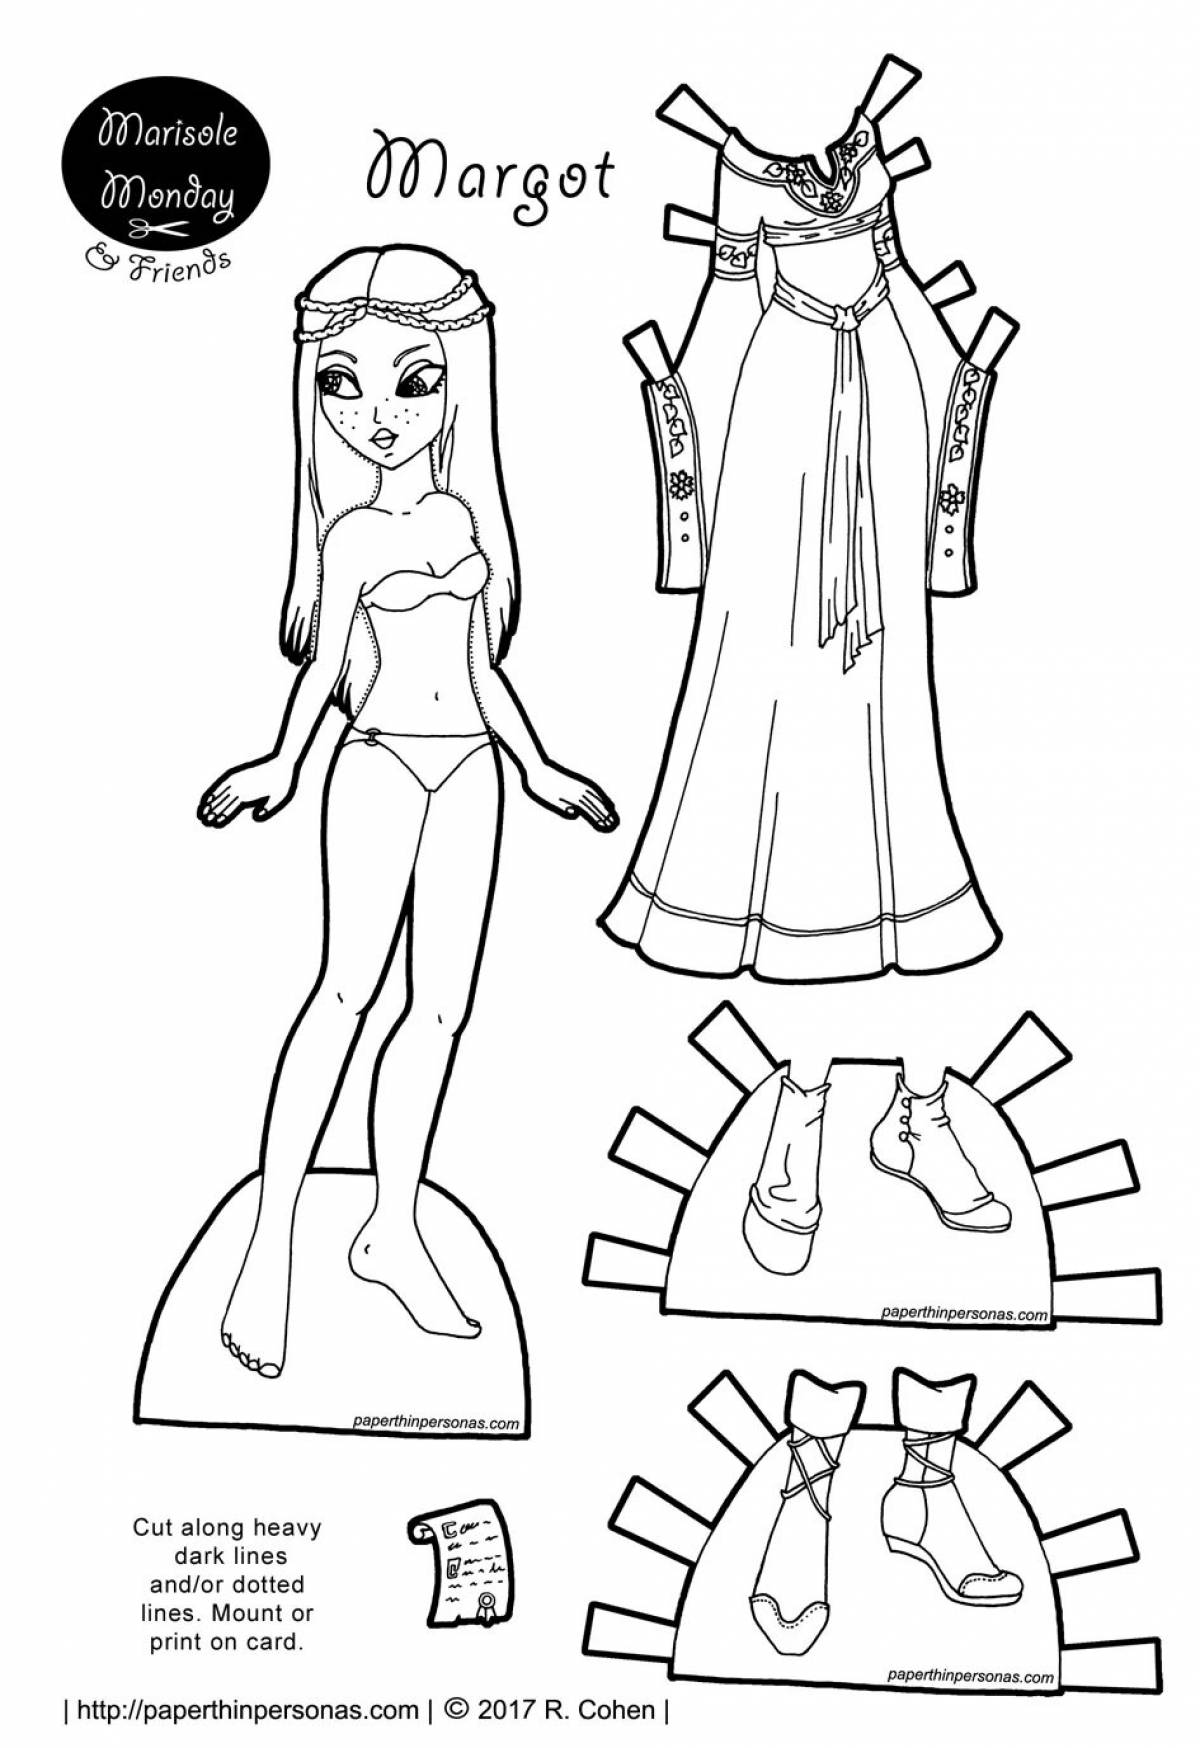 Elsa paper doll with cutout clothes #2